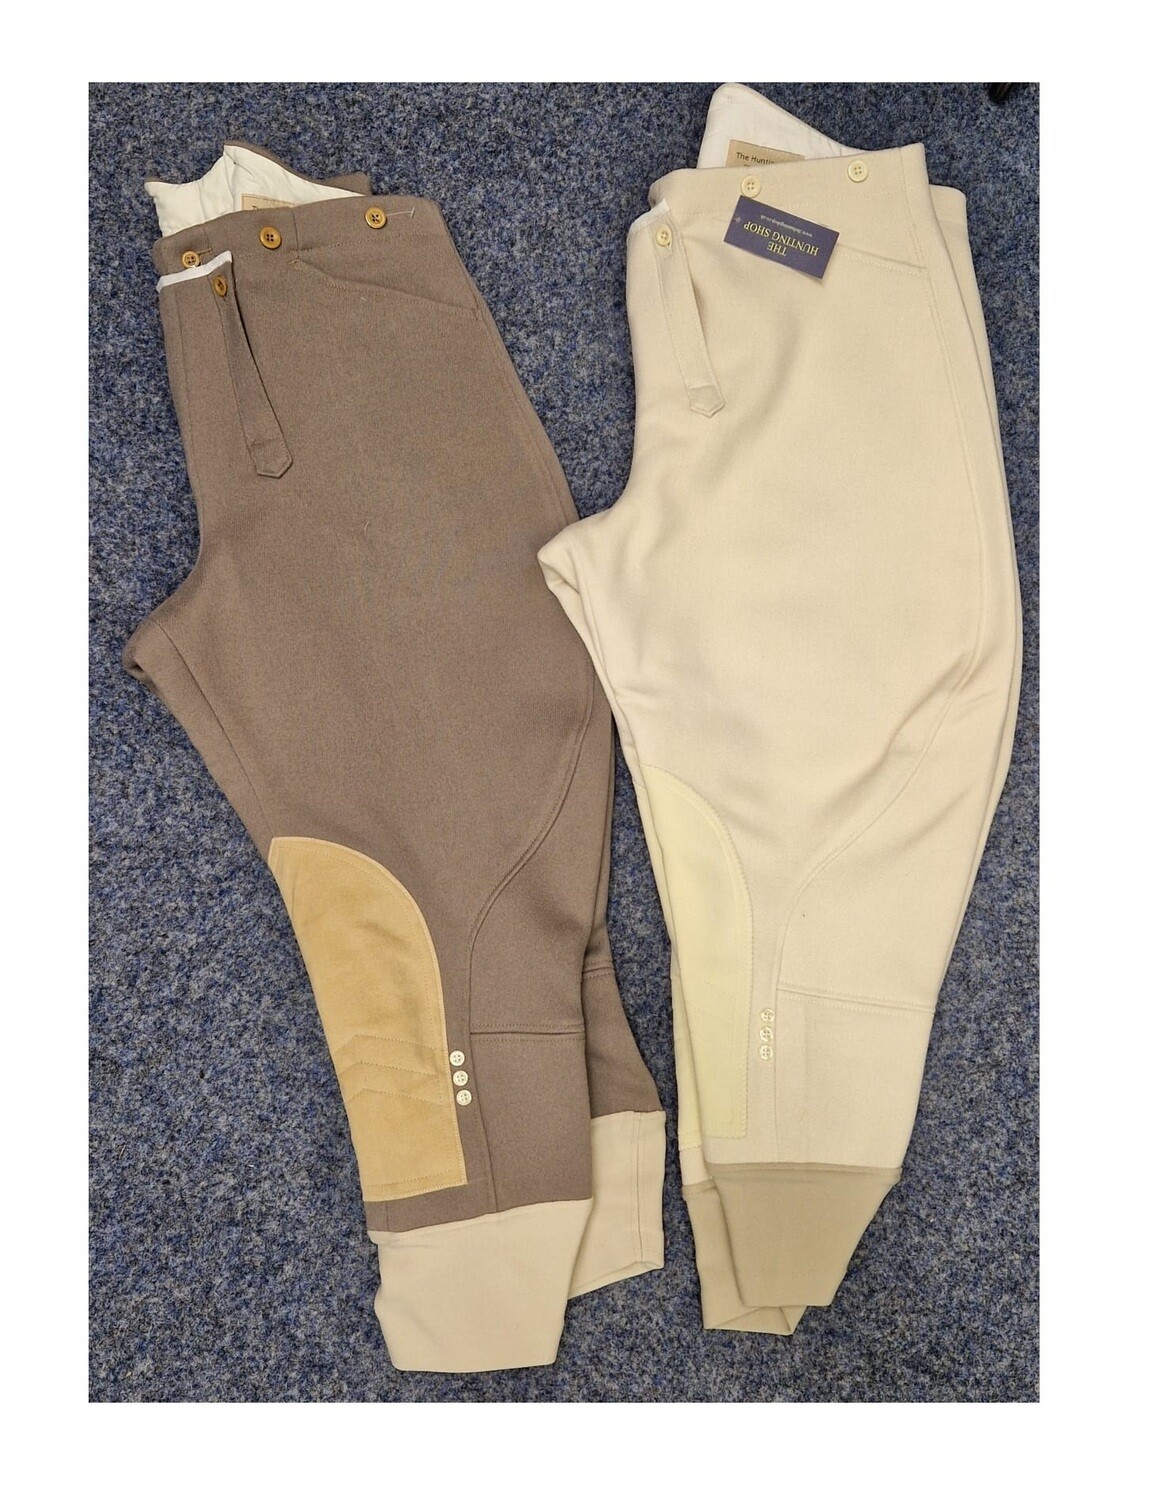 Gents 44" Fawn, Cavalry Twill Hunting Breeches - End of Season Sale